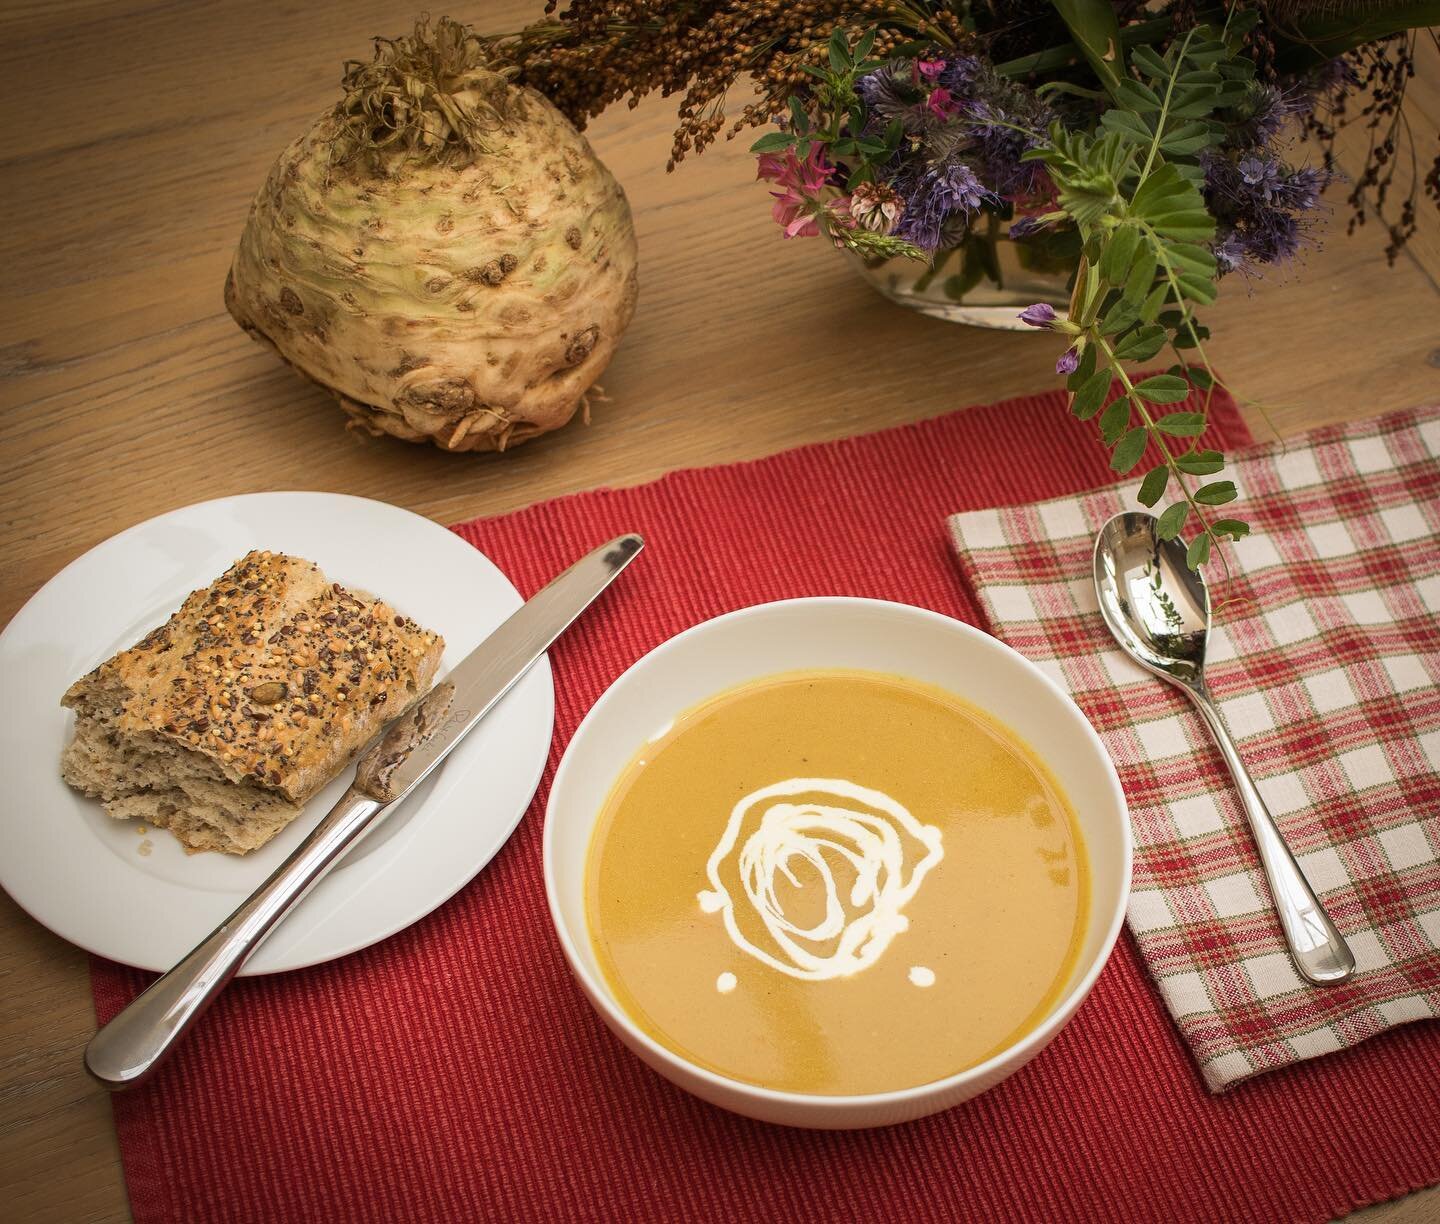 It&rsquo;s a great time of year for celeriac soup. So simple and so satisfying. There are some fantastic recipes out there including one on our website - we like ours with a little spice for extra winter warmth.

One of the easiest things to make wit